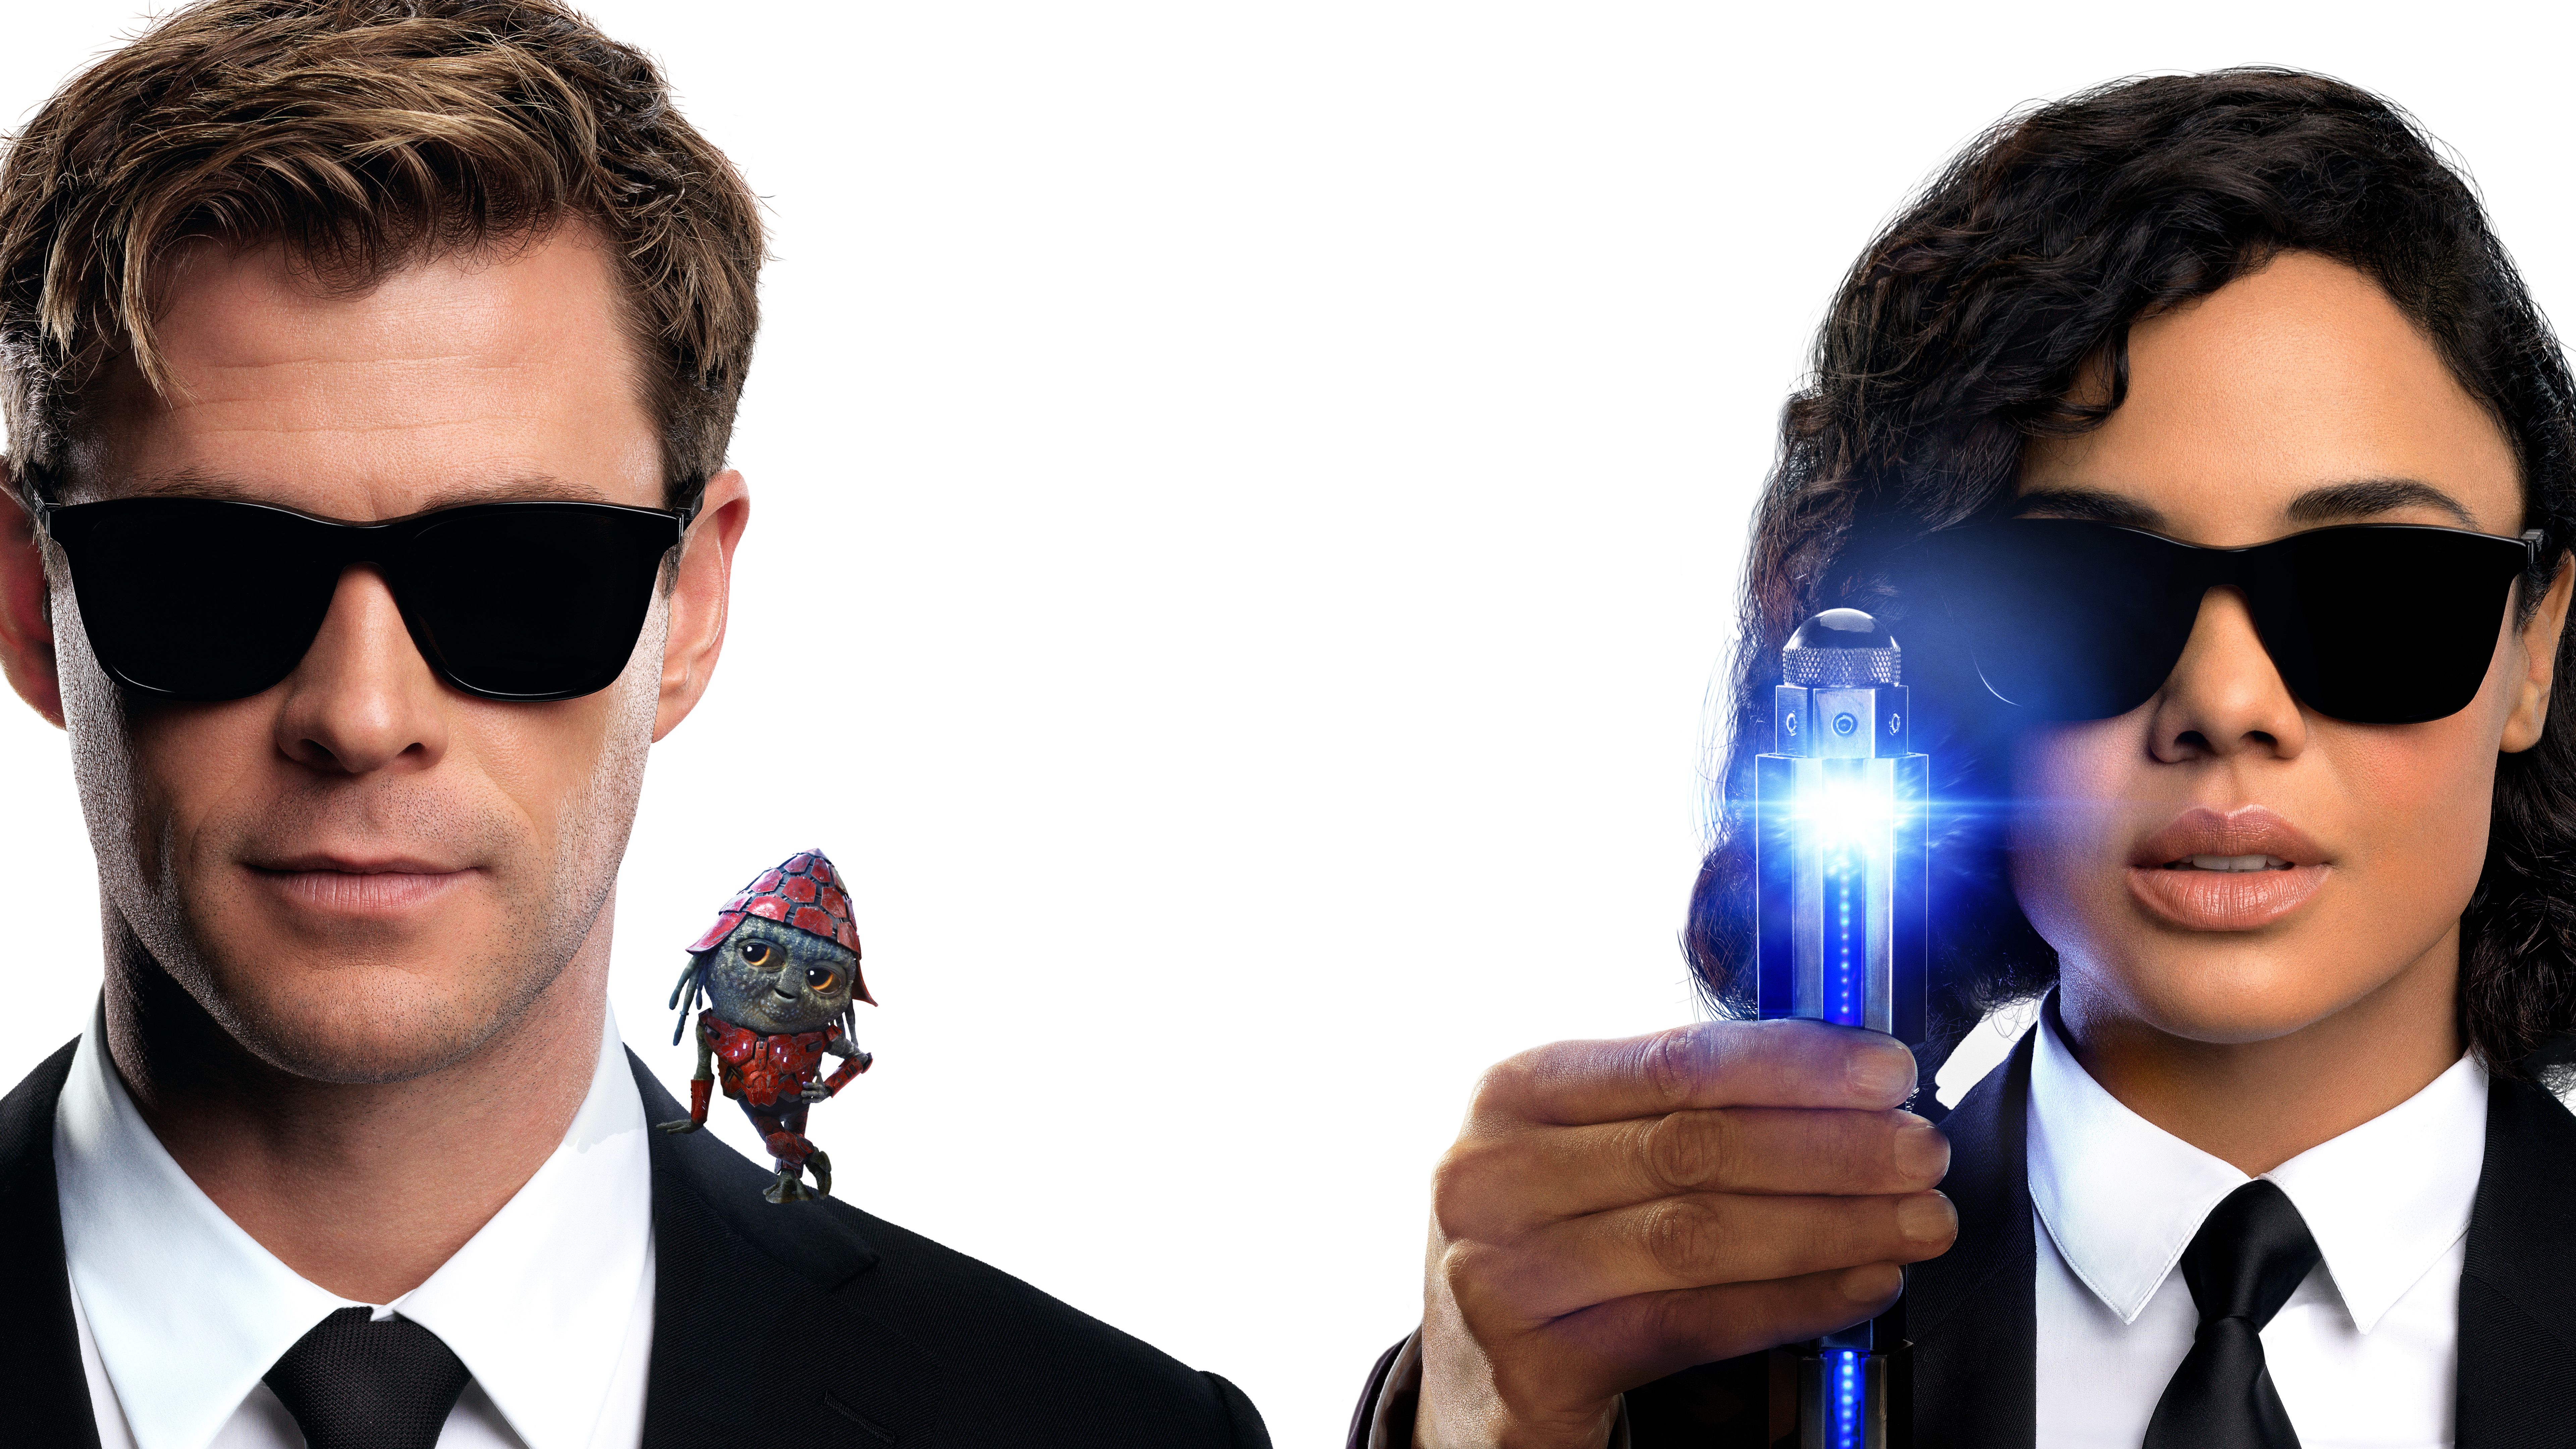 People 7680x4320 Men in Black: International Chris Hemsworth Tessa Thompson Men in Black frontal view actor actress movies women with shades men with shades women men face